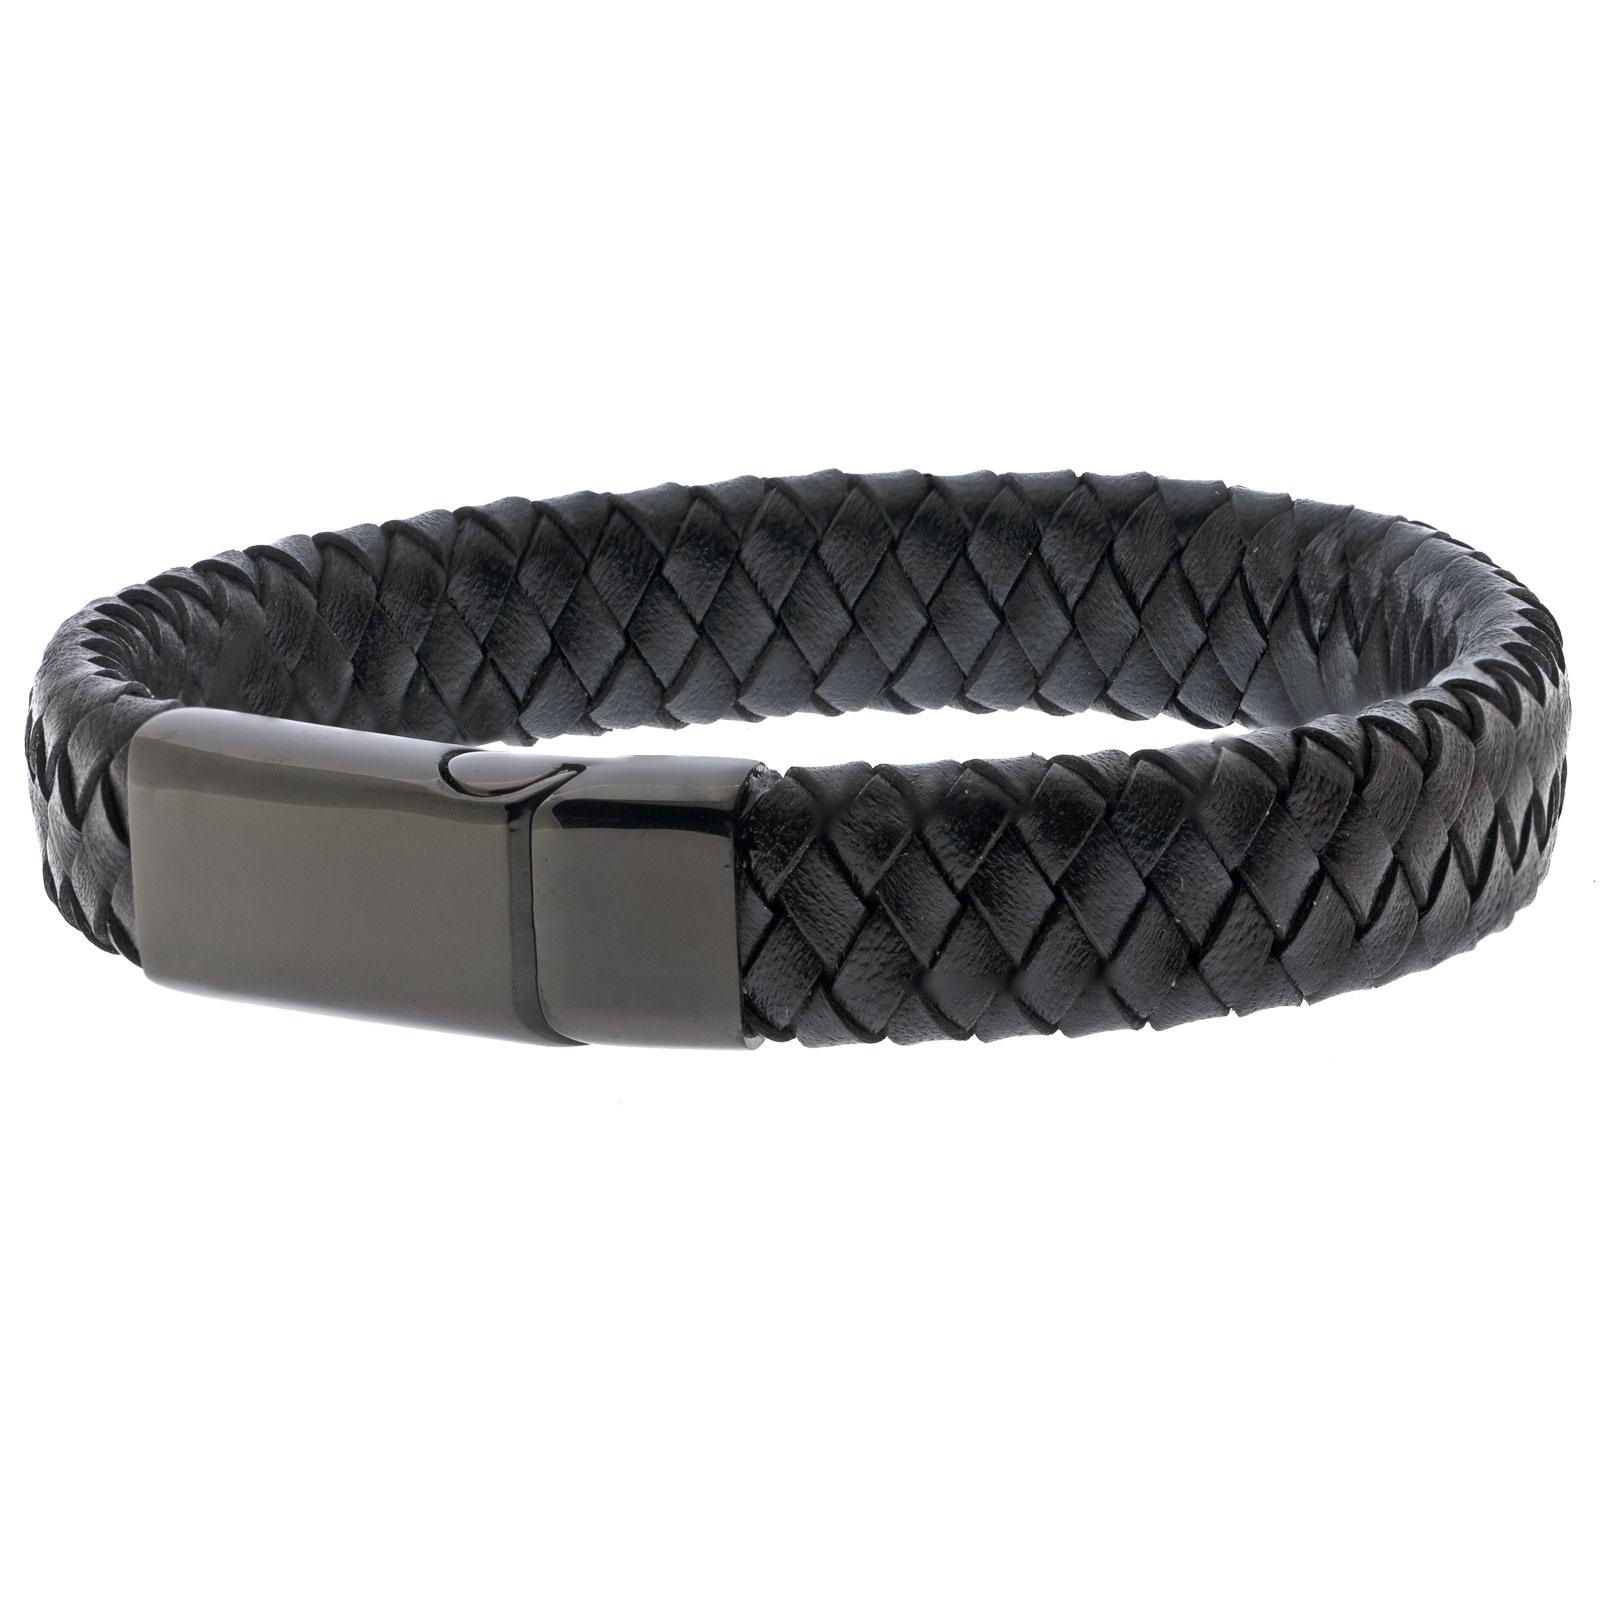 All Black, Chunky and Wide Leather Bracelet for men.